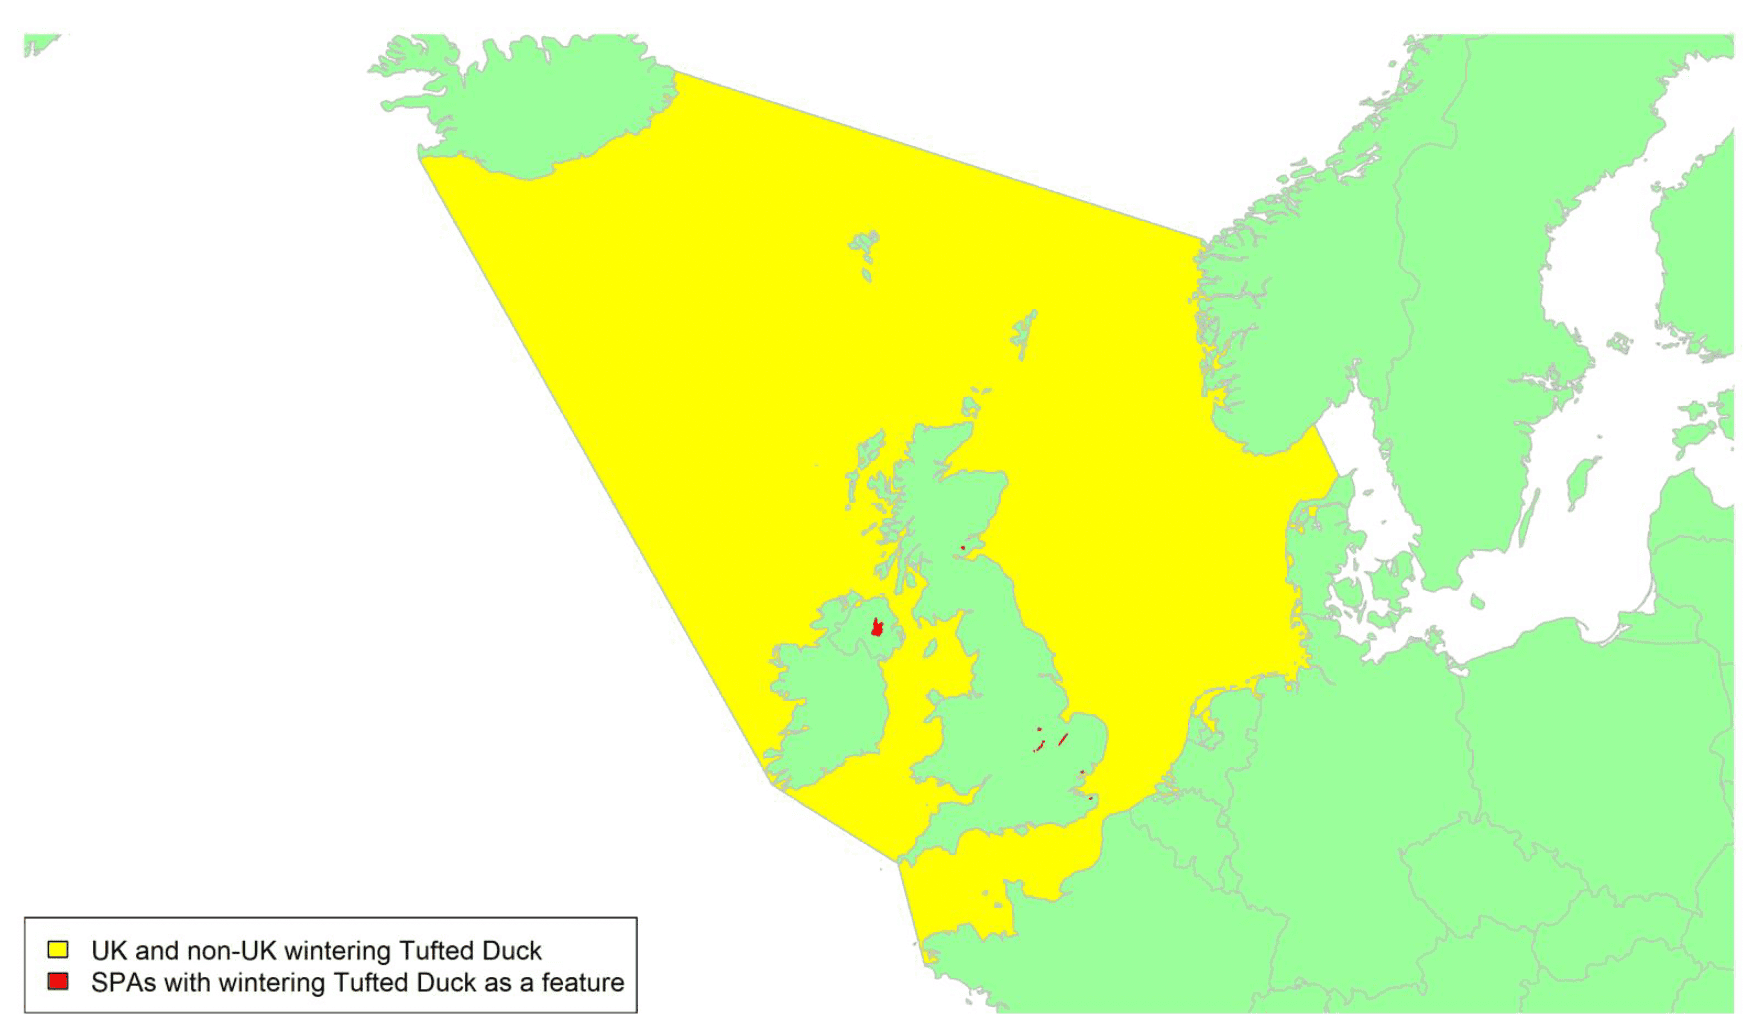 Map of North West Europe showing migratory routes and SPAs within the UK for Tufted Duck as described in the text below.